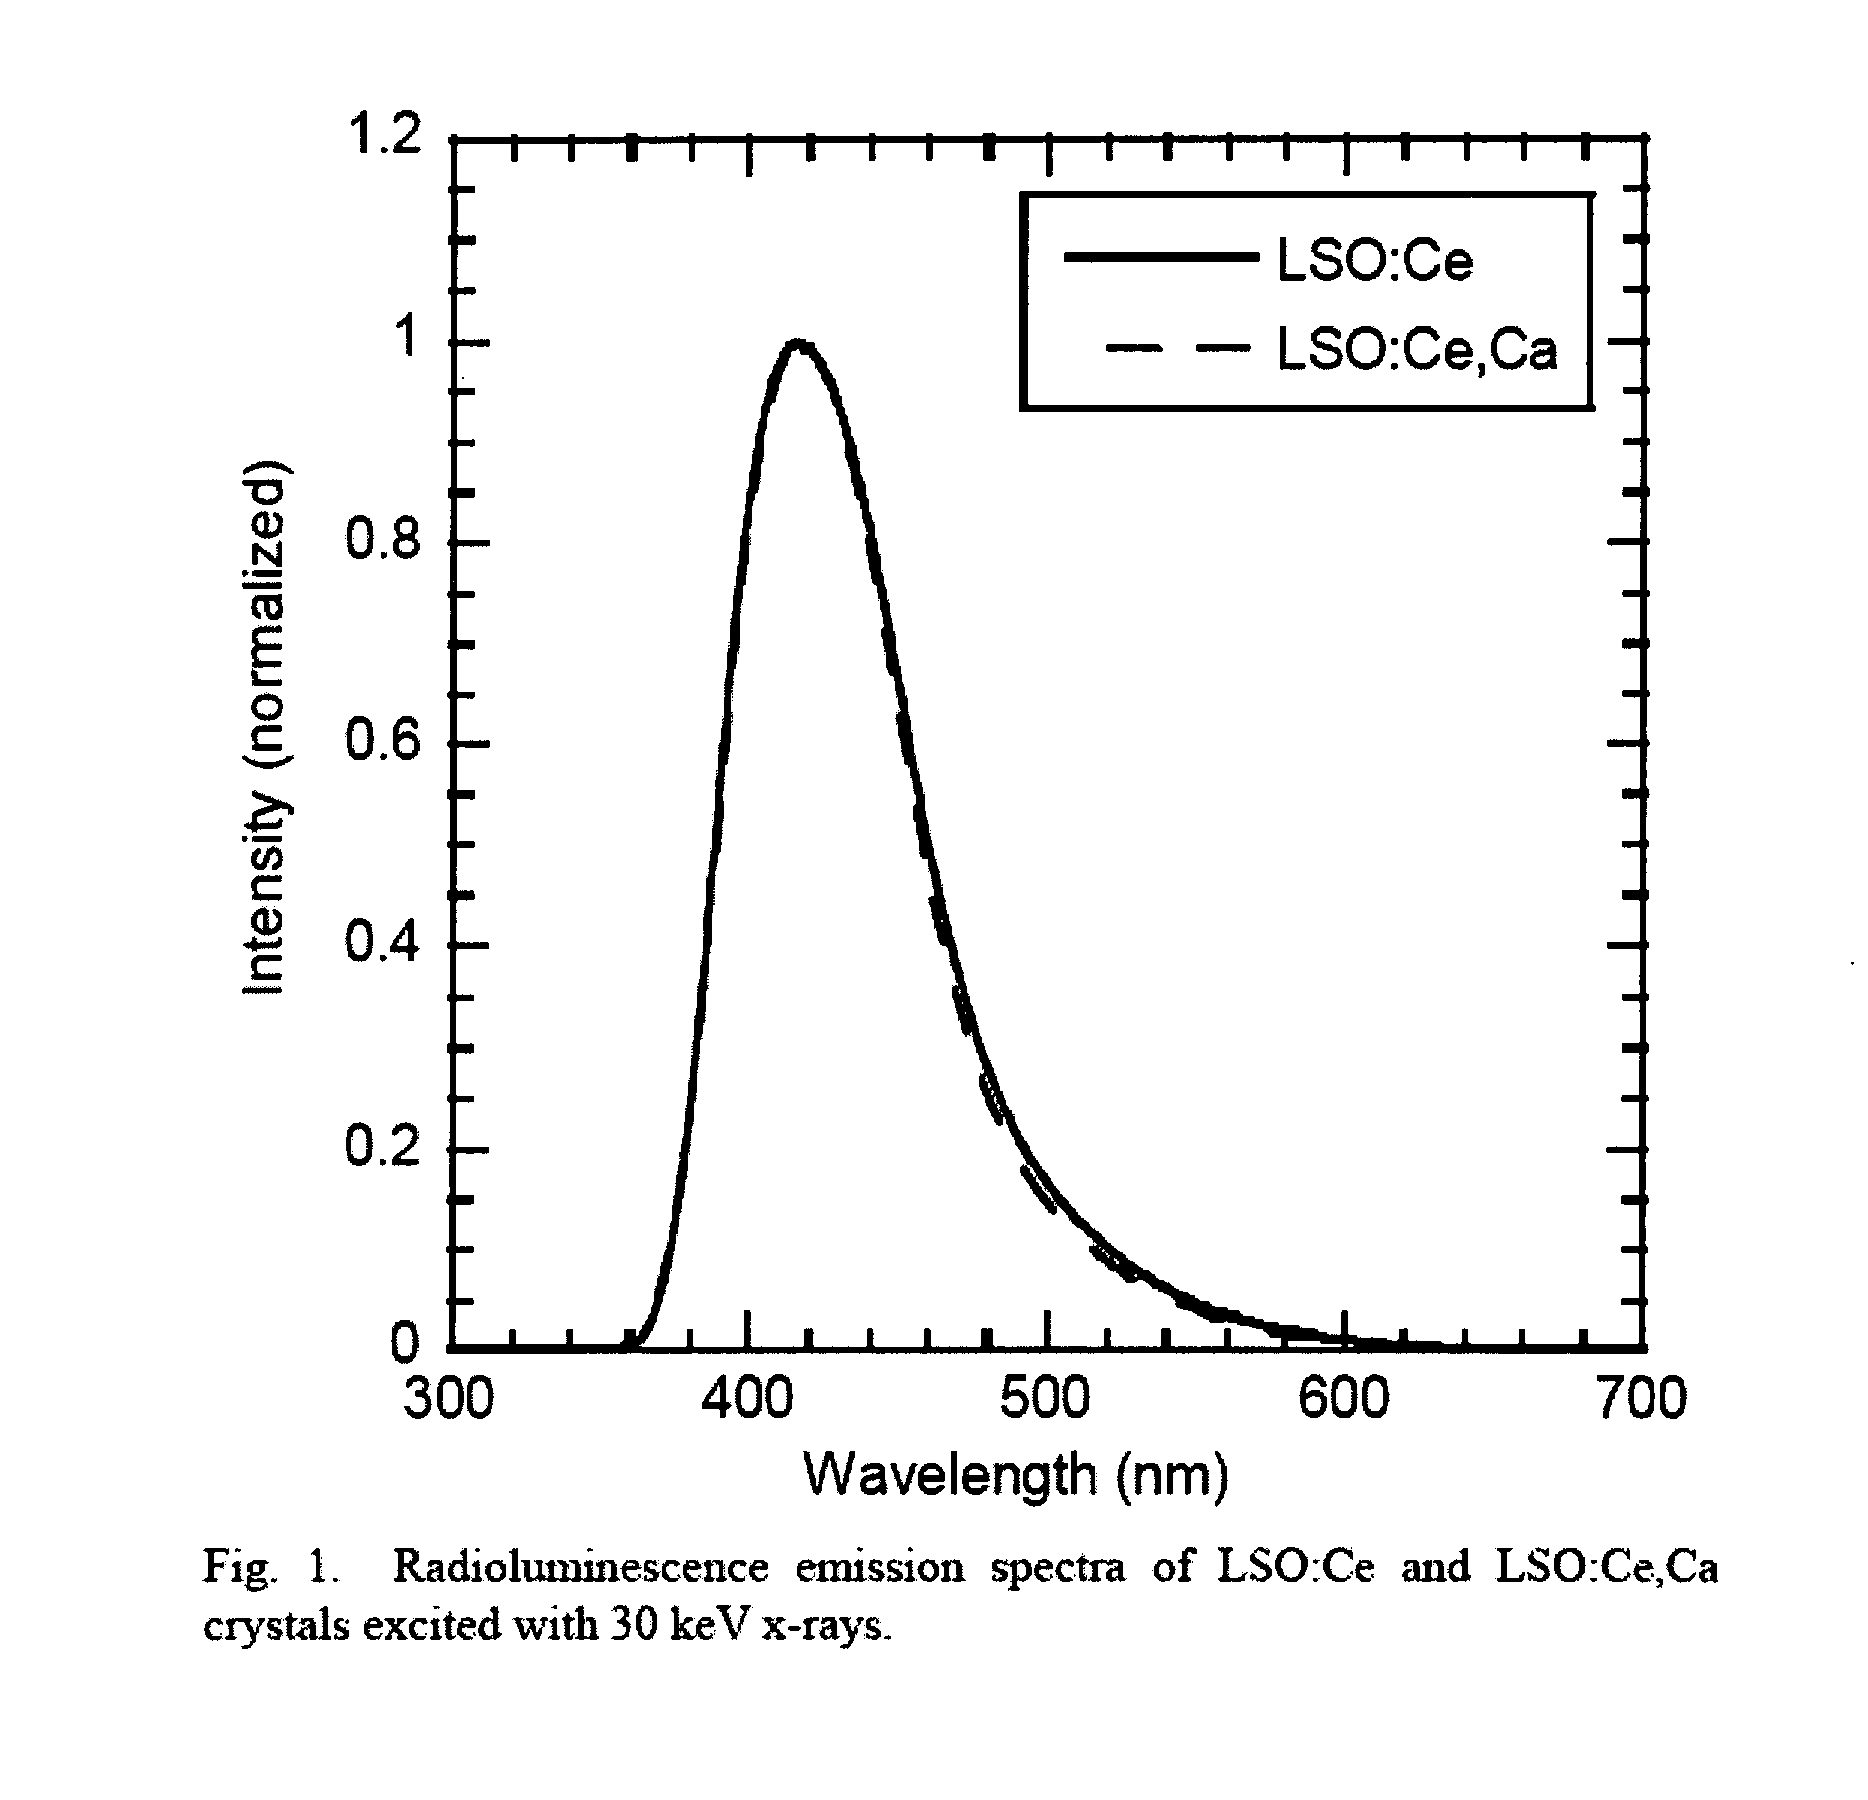 Lutetium oxyorthosilicate scintillator having improved scintillation and optical properties and method of making the same